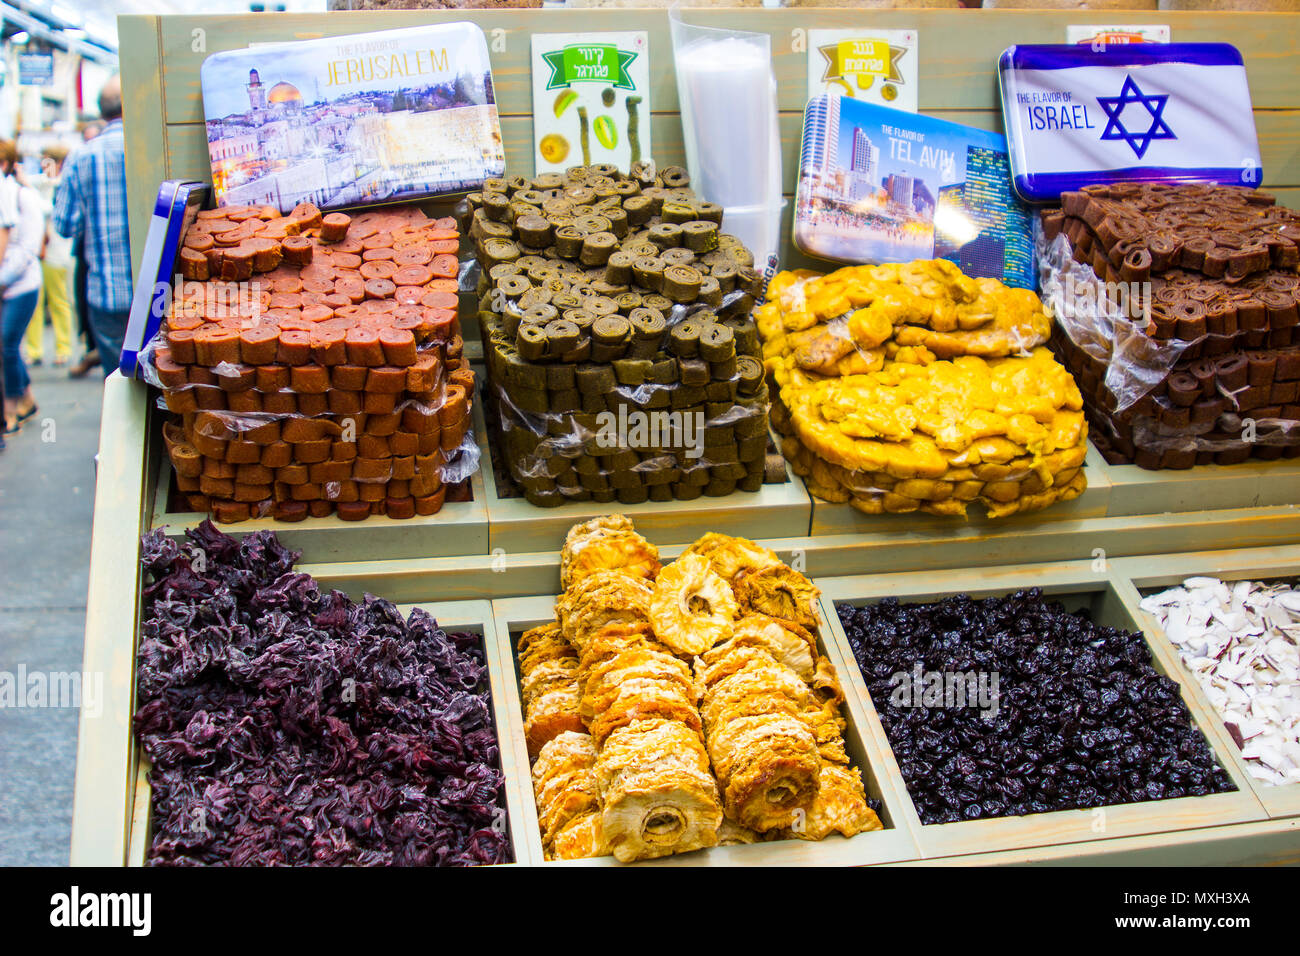 9 May 2018 A large range of confectionary on display at a vendor's stall at the Mahane Yehuda covered street market in Jerusalem Israel Stock Photo